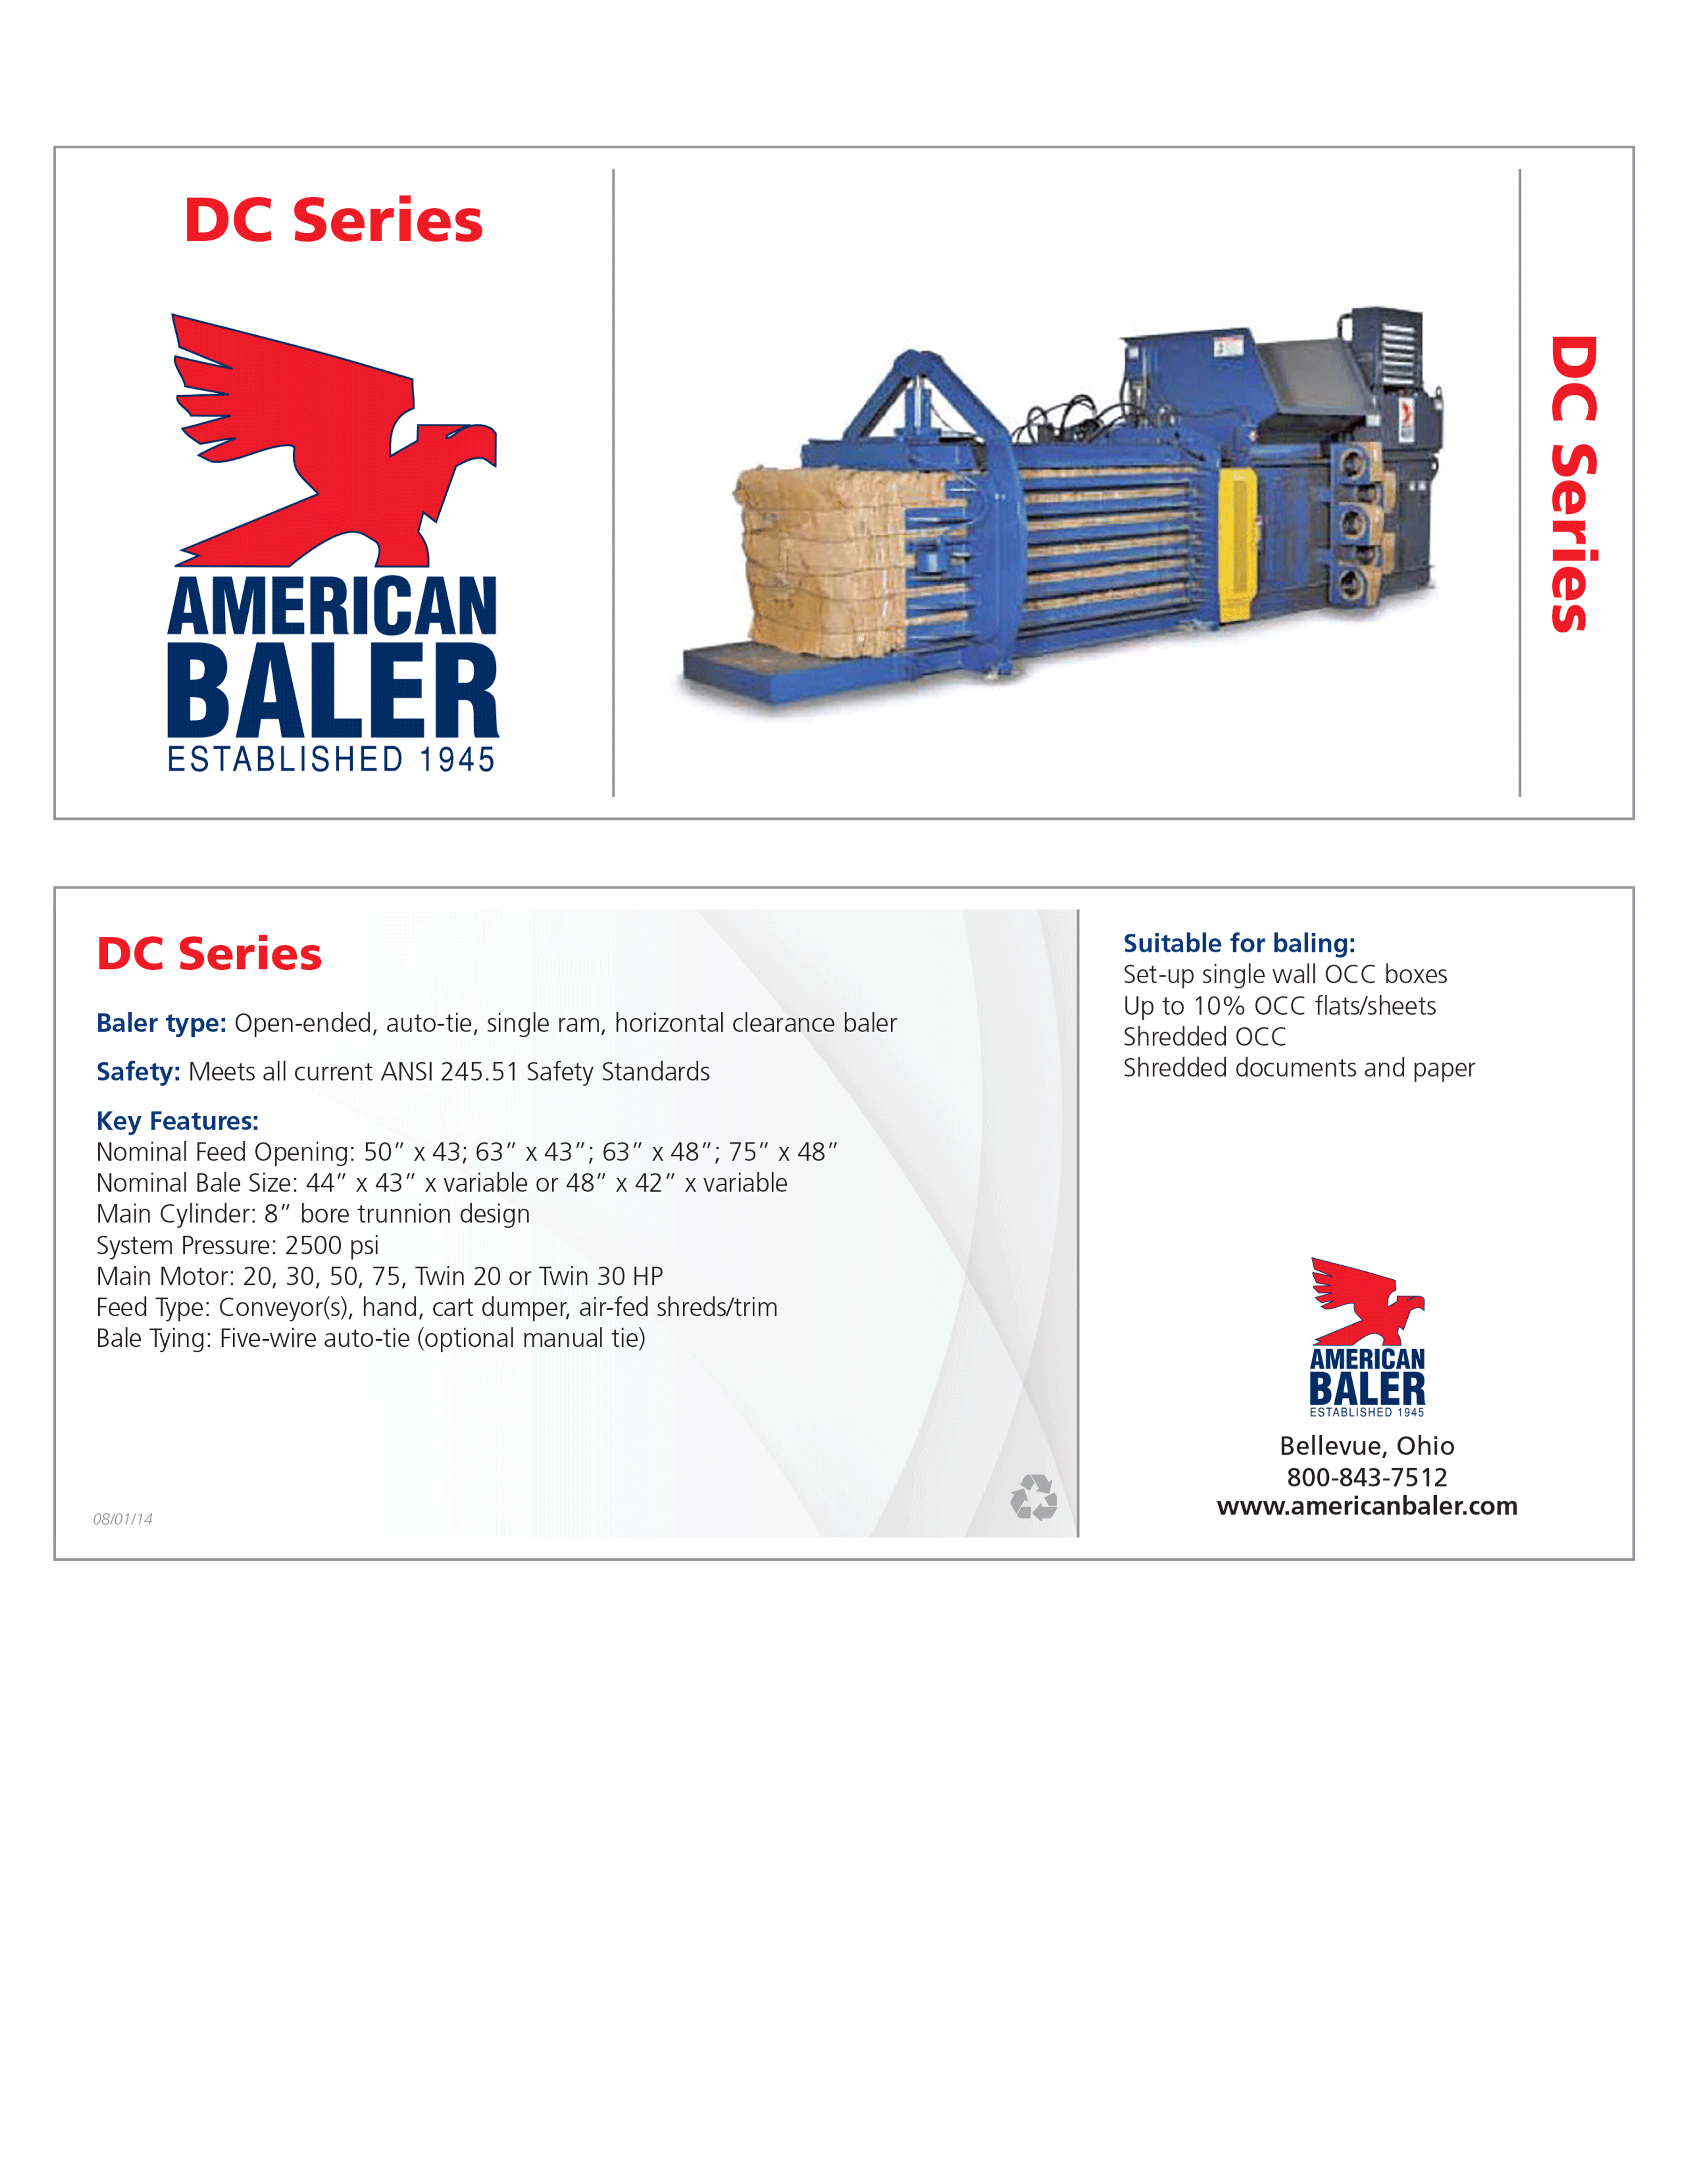 Learn more about the DC Series Baler in American Baler’s Brochure. 